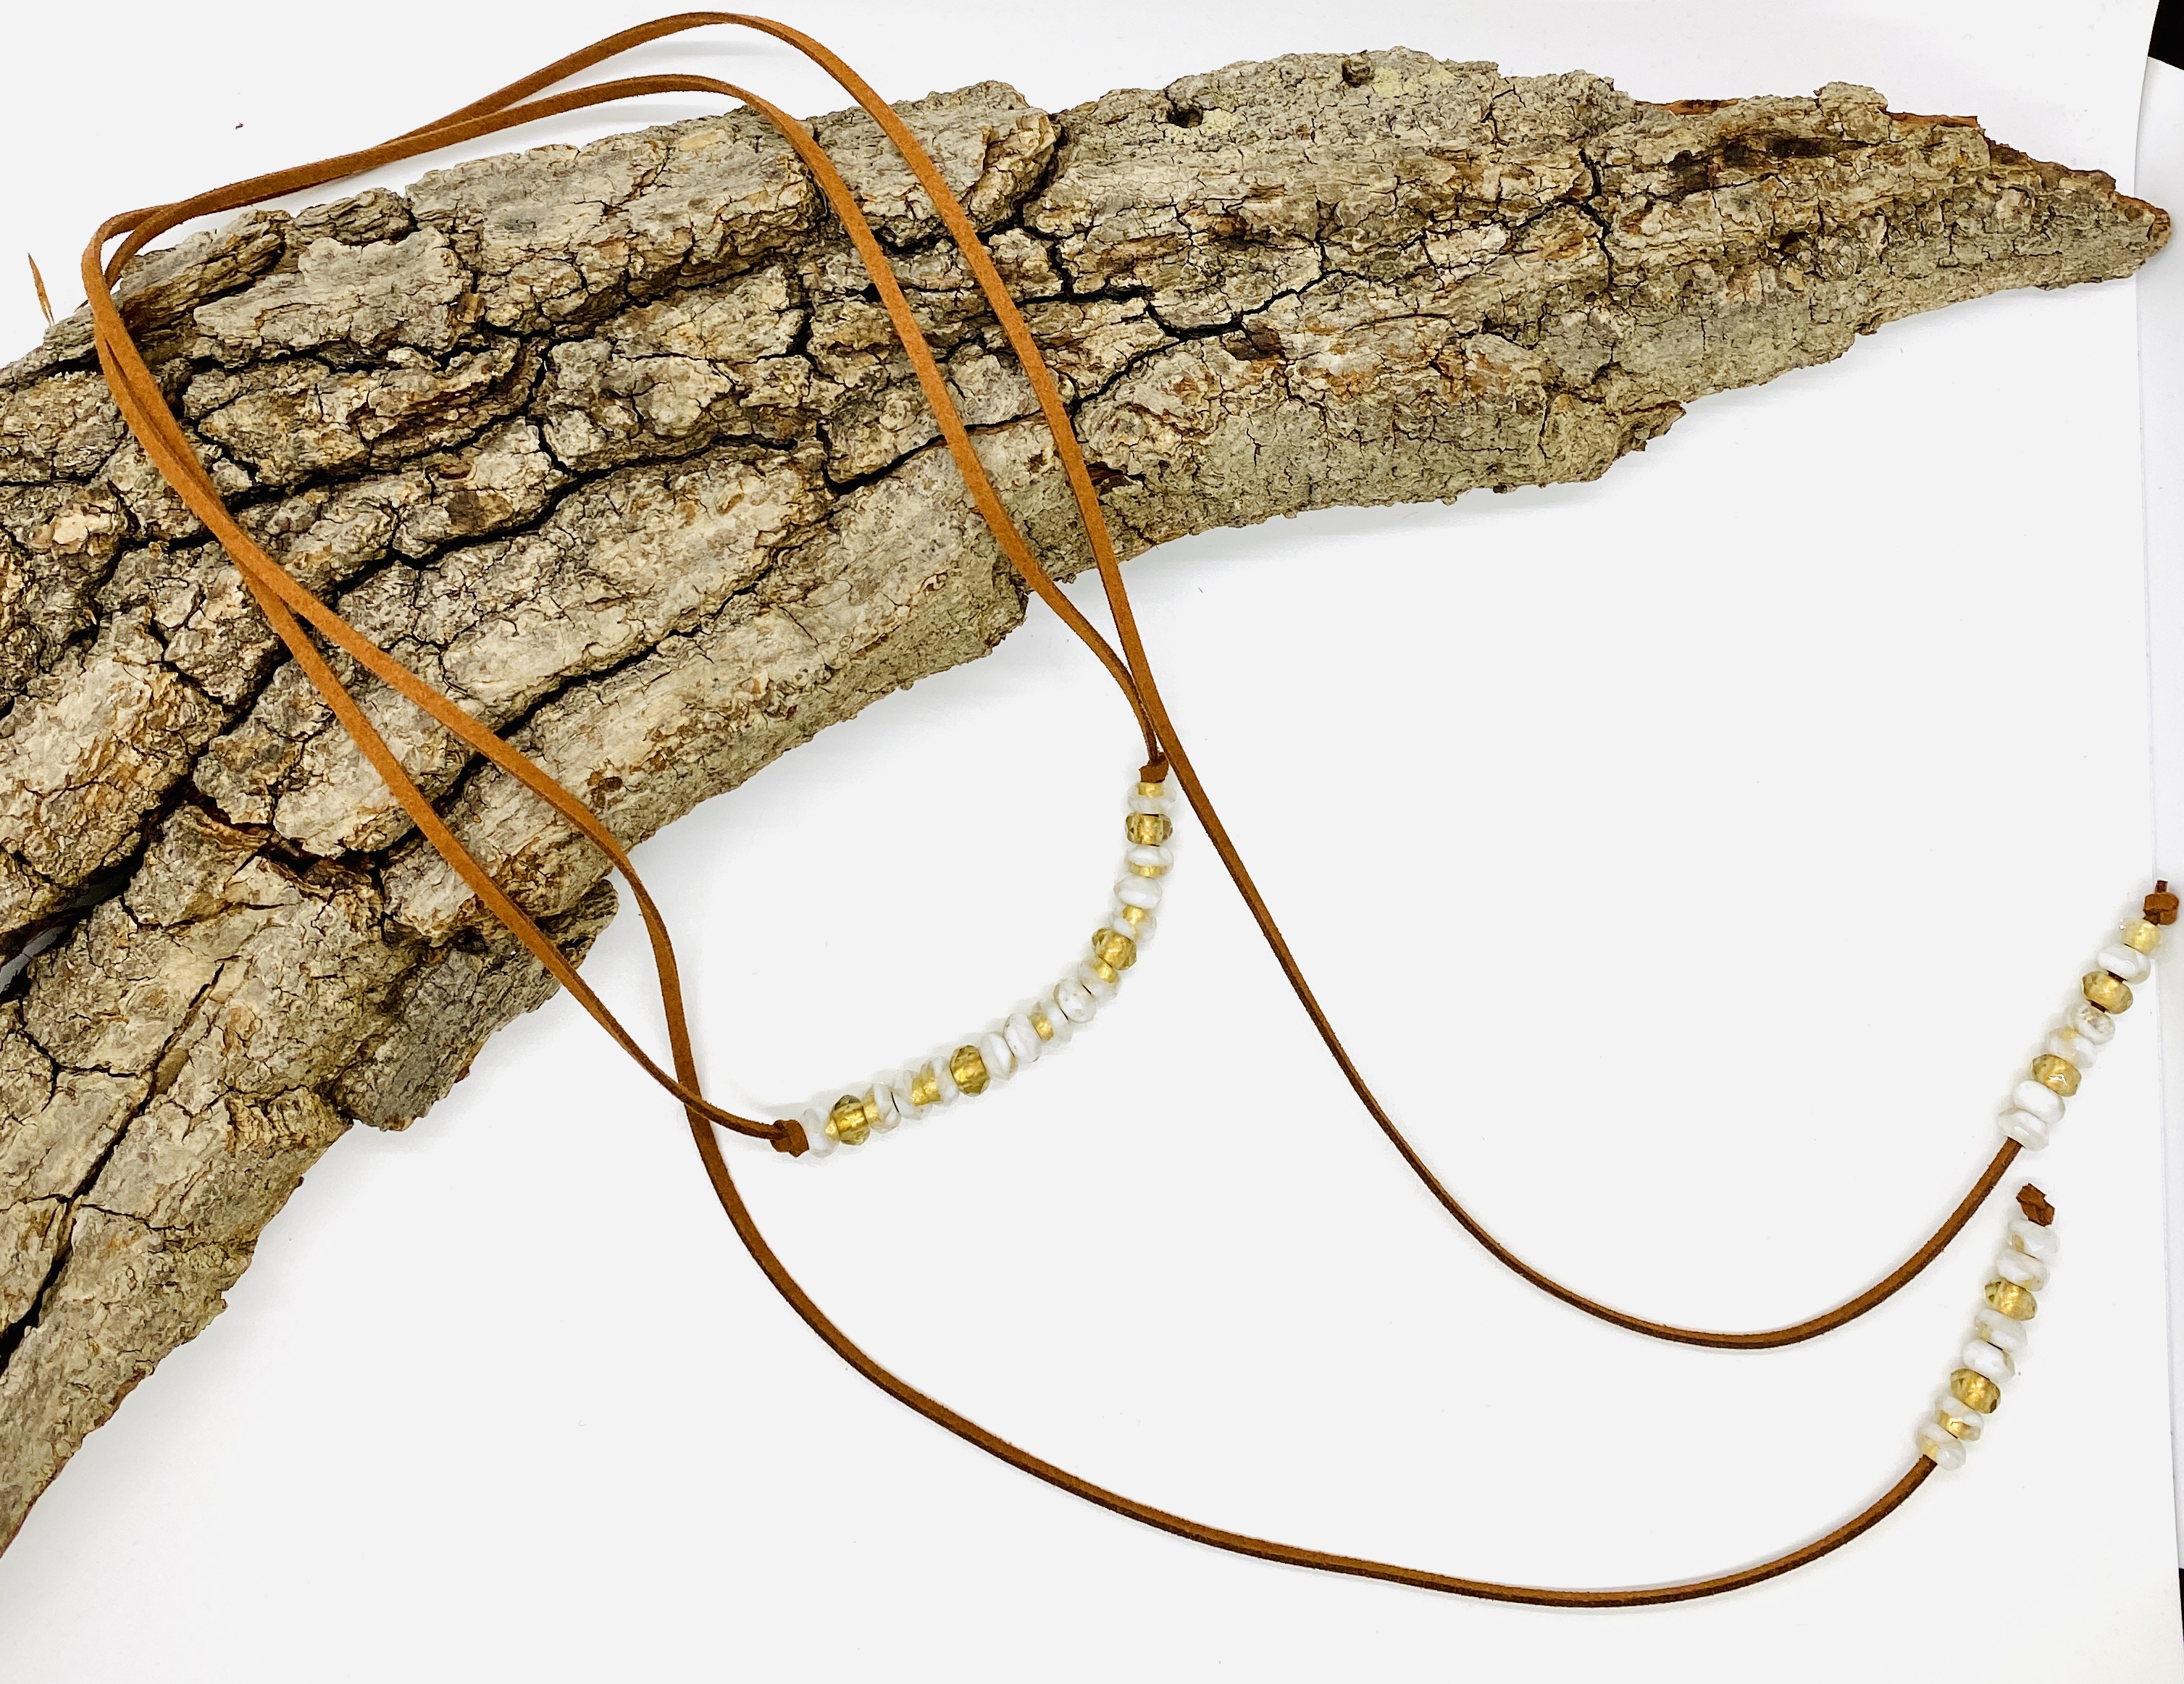 A photo of a Boho wrap necklace draped over a piece of driftwood.